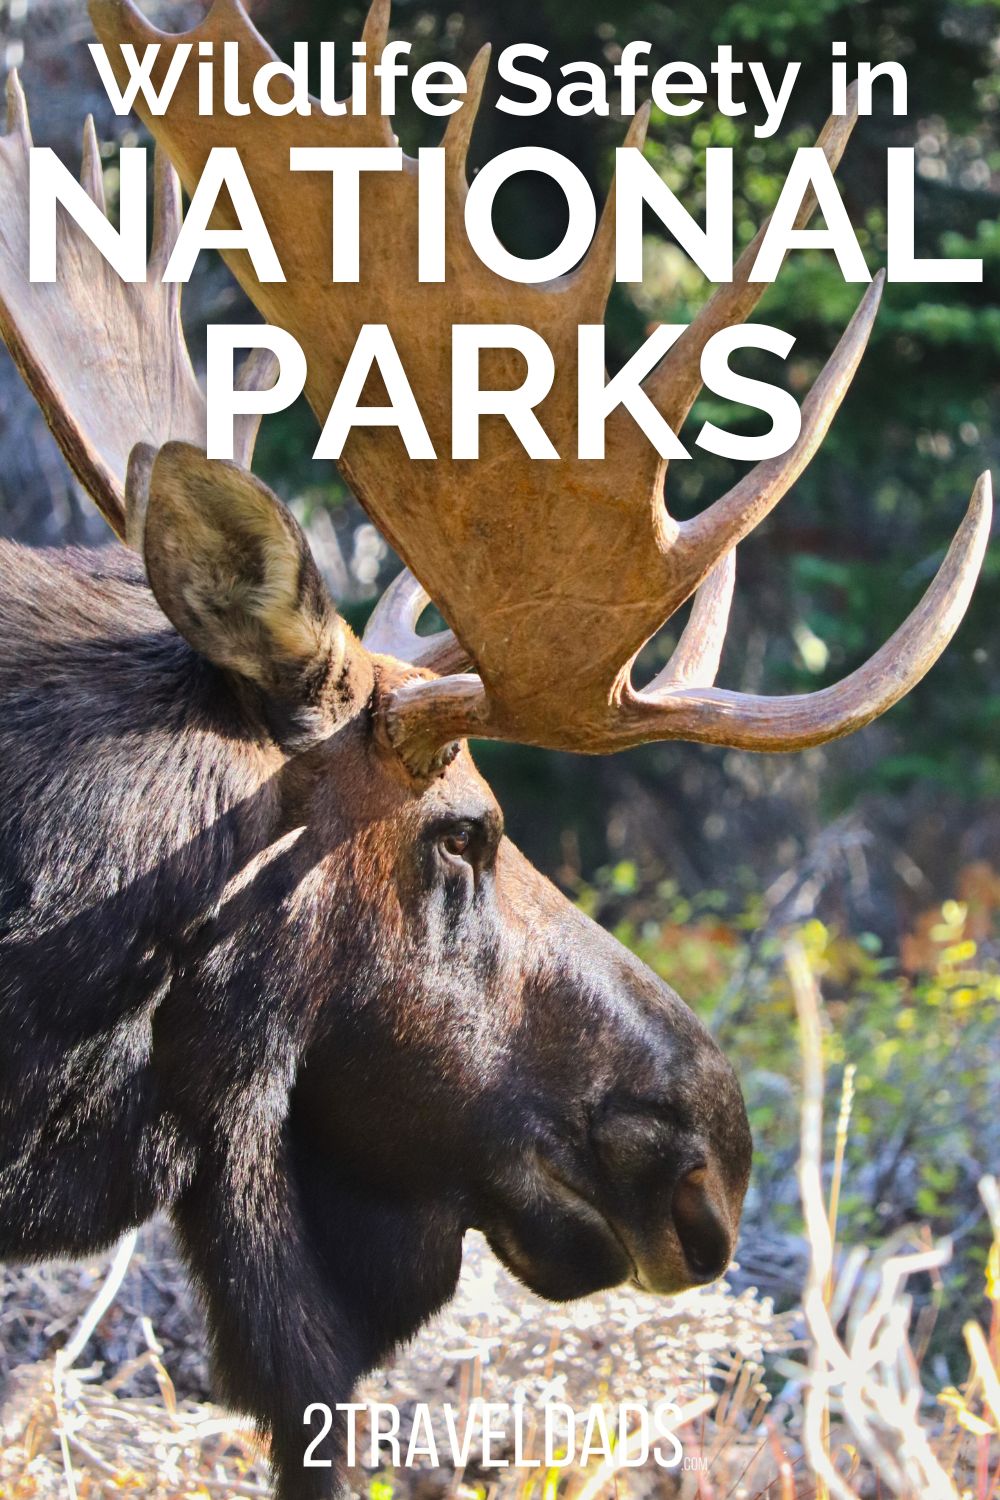 Wildlife safety in National Parks is very important, both for enjoying nature and protecting yourself and the wild animals. Tips and rules for having safe experiences with wildlife in National Parks.